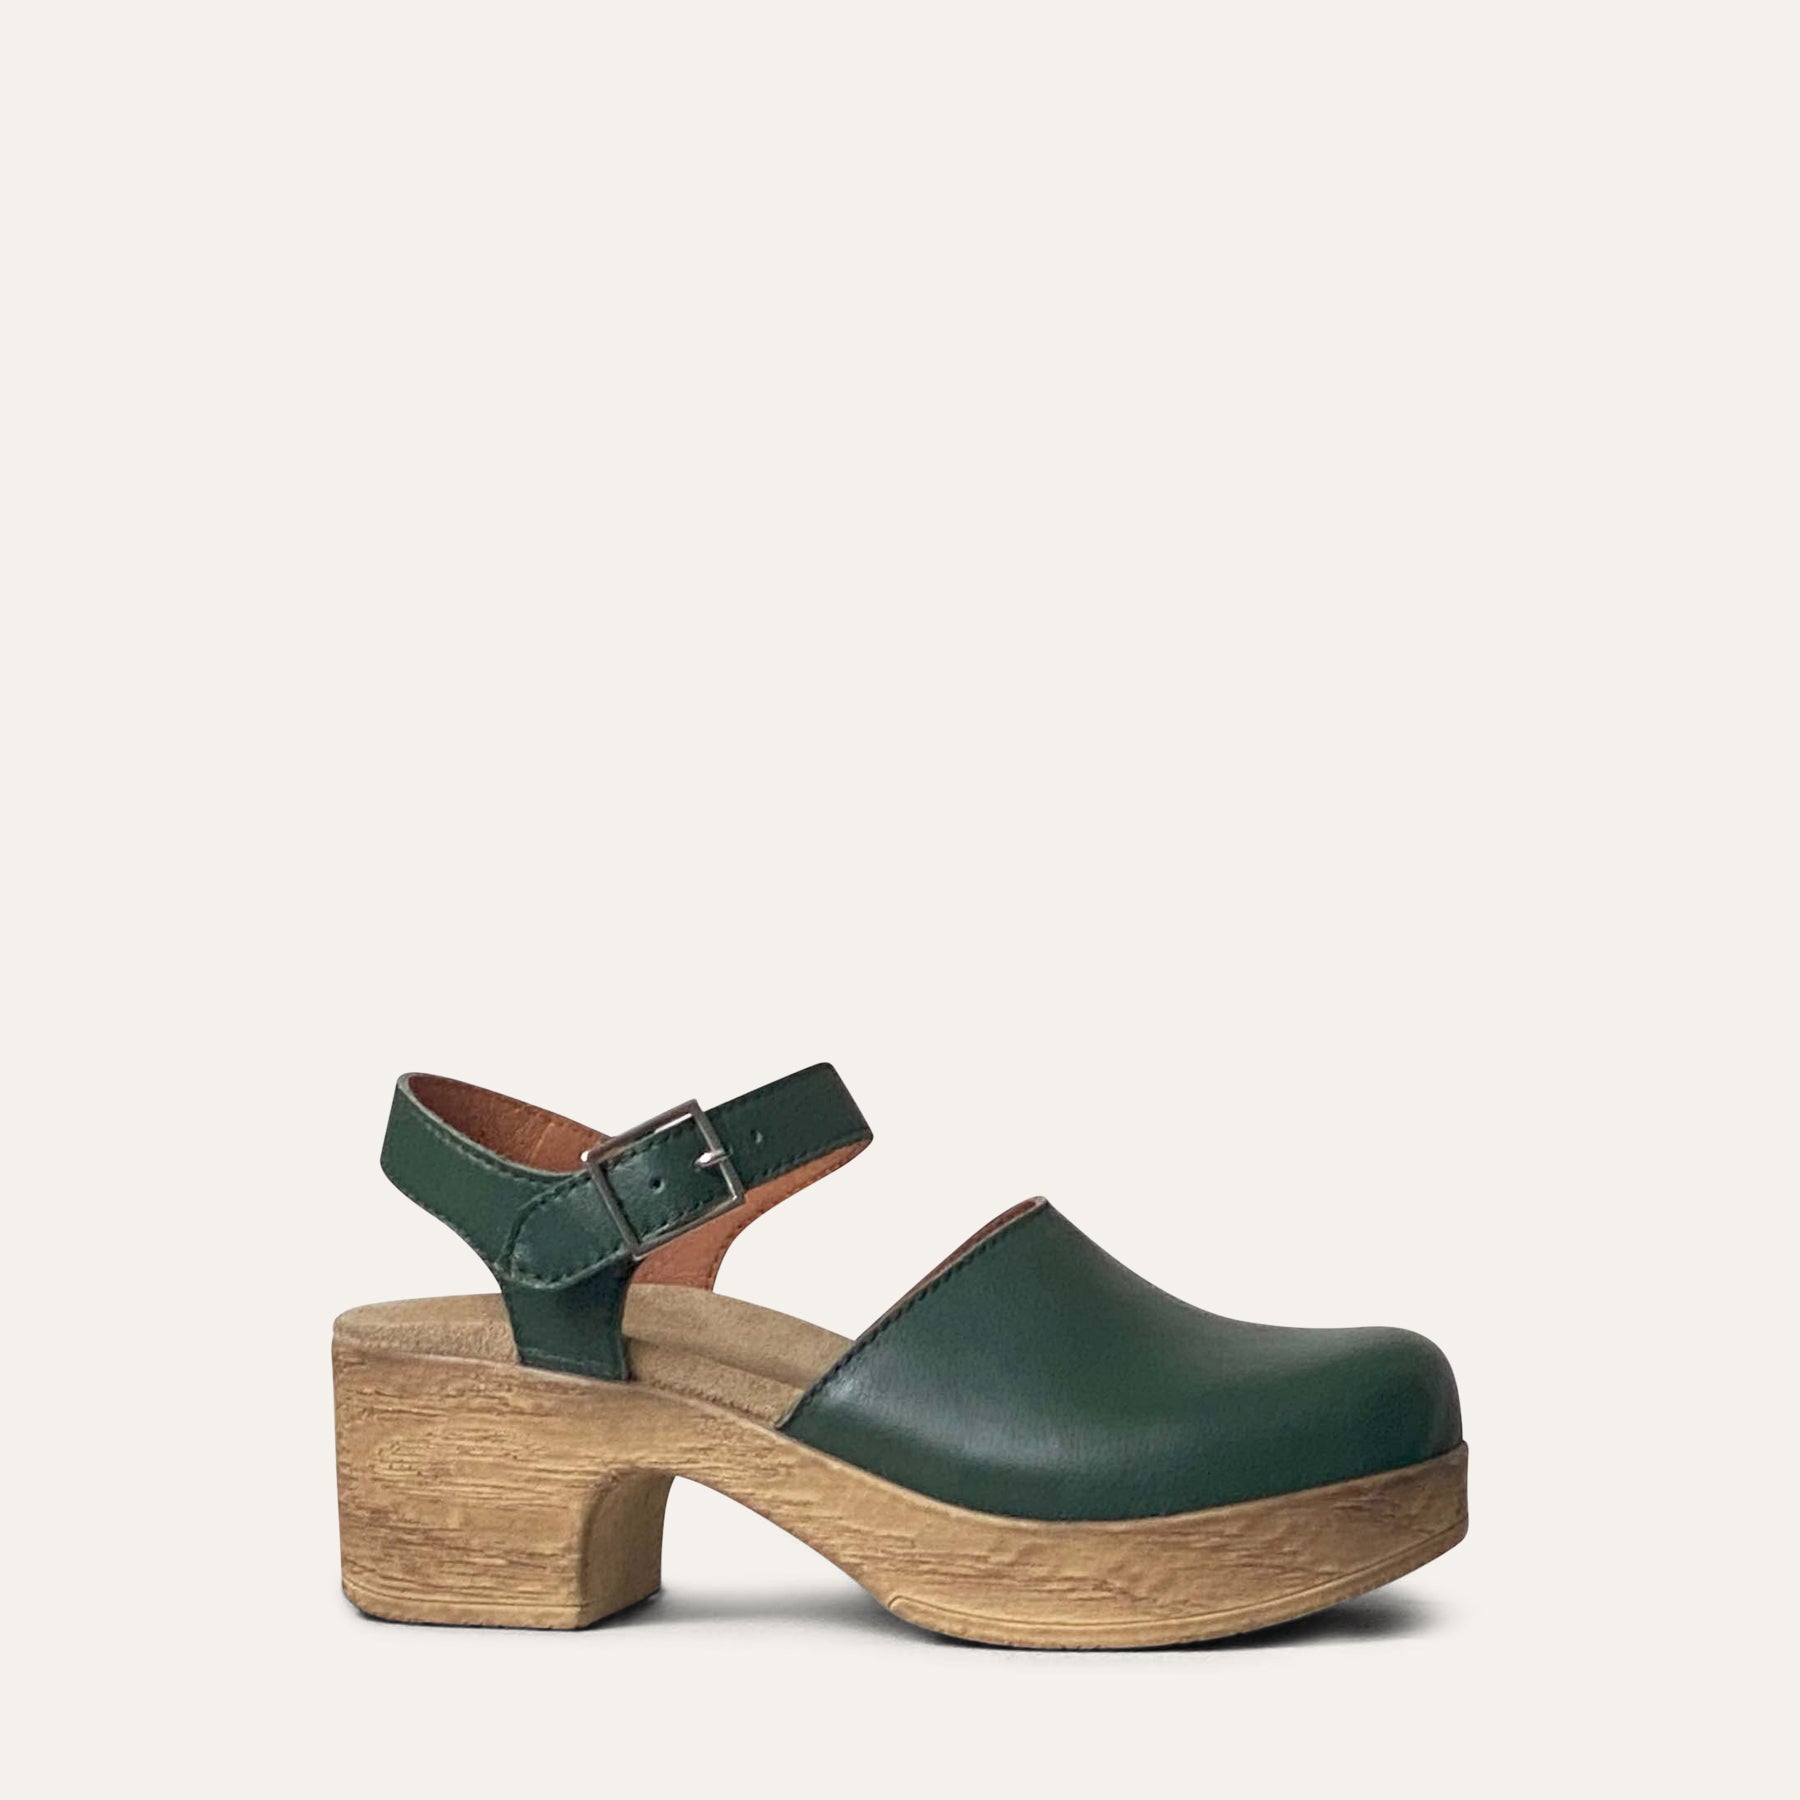 Clogs Women Clogs Boots Shoes With Wooden Sole Wooden Clogs Shoes With  Wooden Platform Clogs With Strap Clog Sandals Low Heel Wood Platform -   Israel